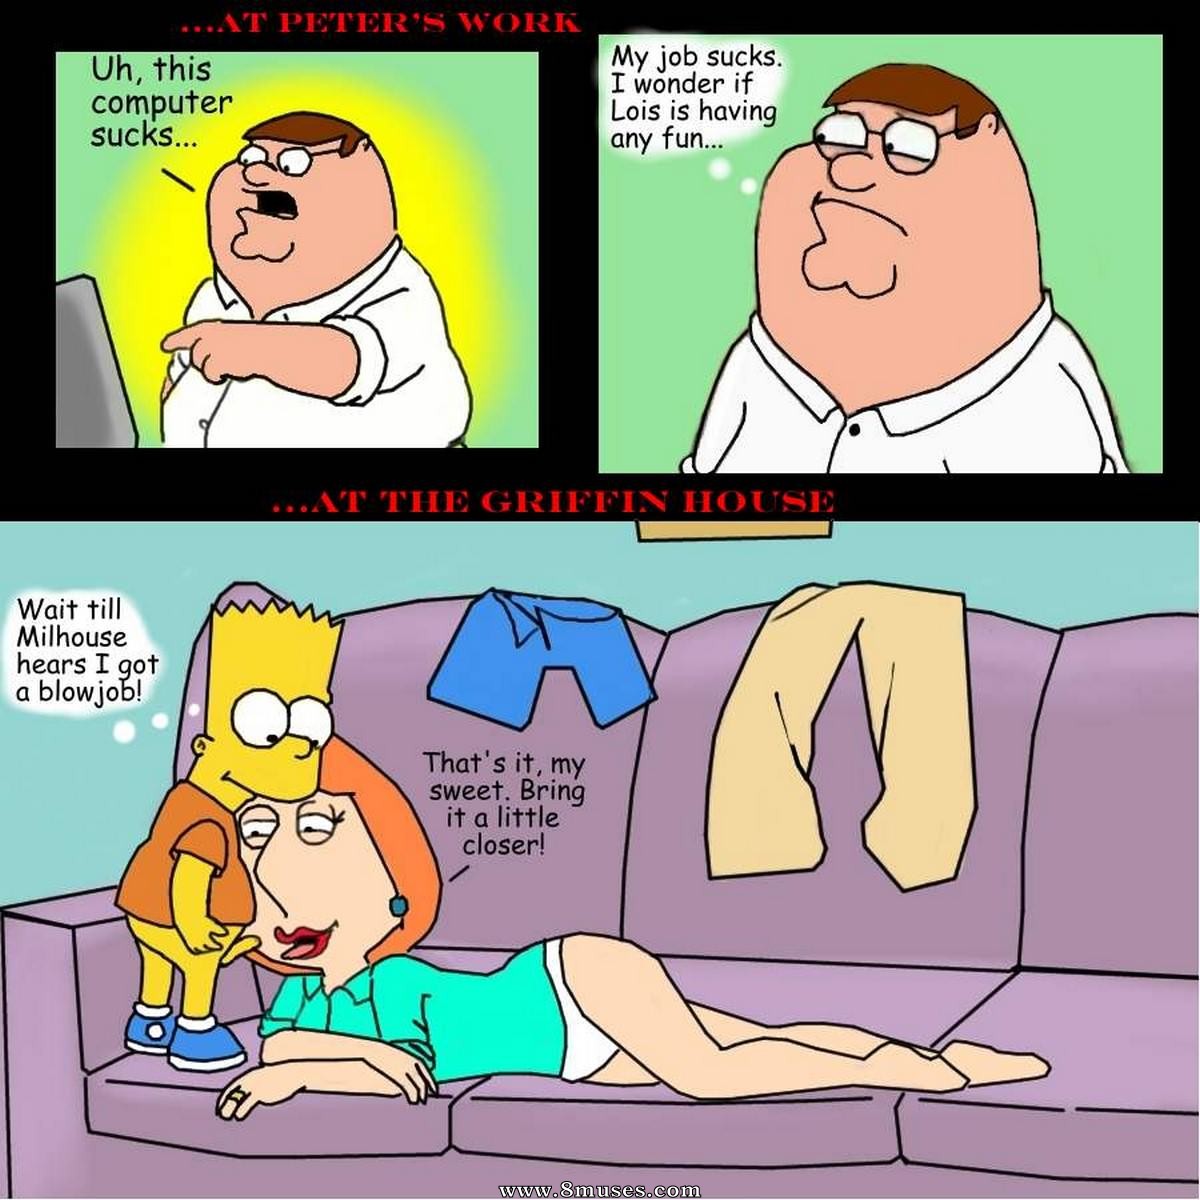 Family Guy Lesbian Porn Comics - Family Guy Bart simpson and Lois Griffin fucking Issue 1 - 8muses Comics - Sex  Comics and Porn Cartoons